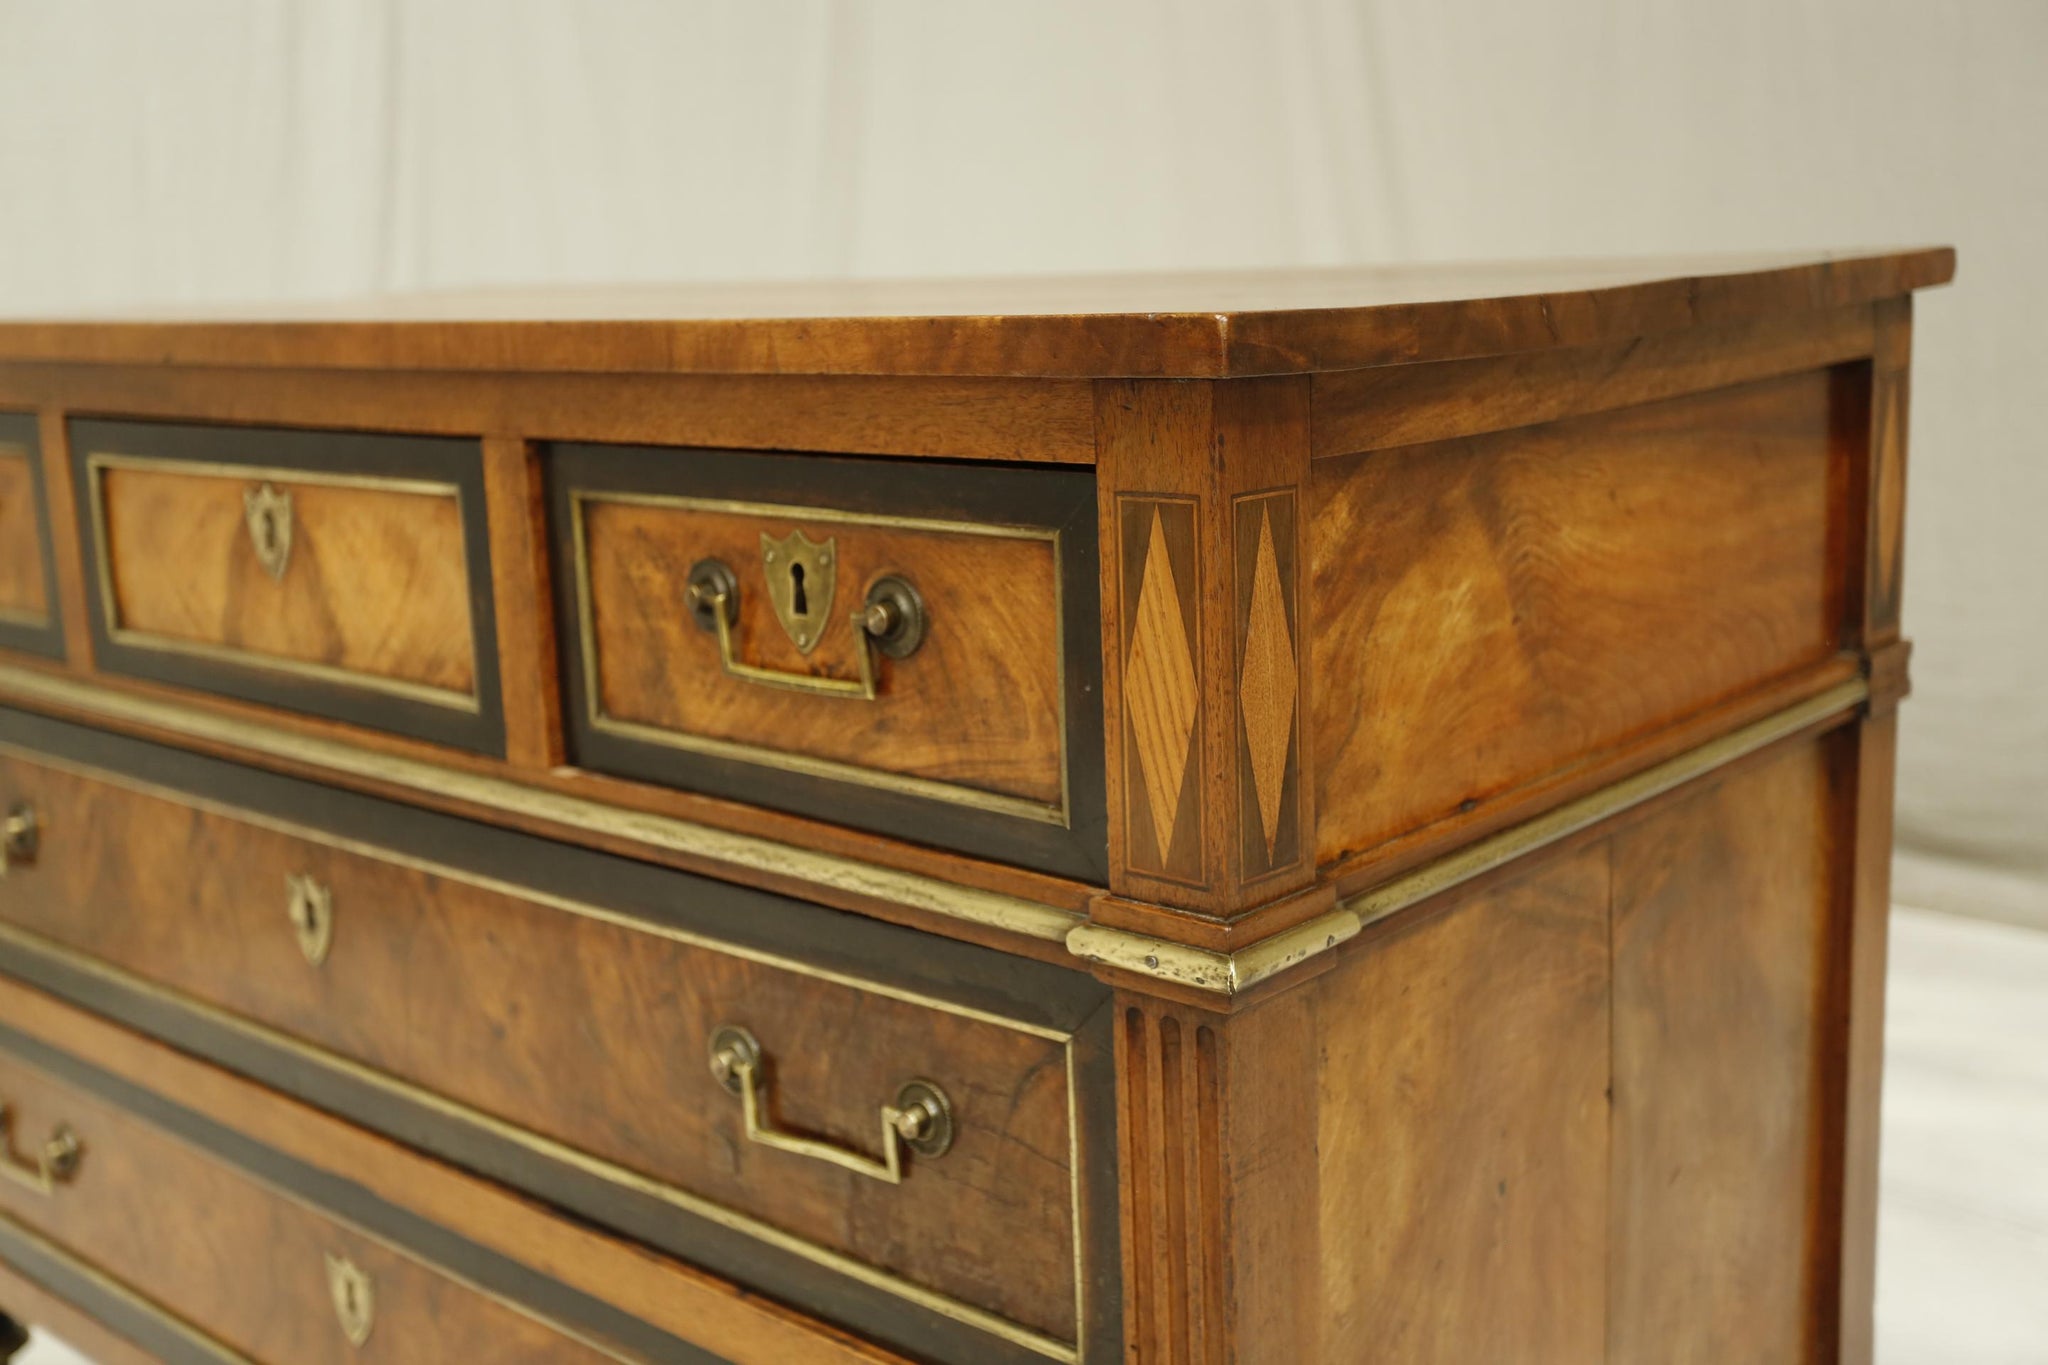 Antique 19th century French walnut and ebony chest of drawers